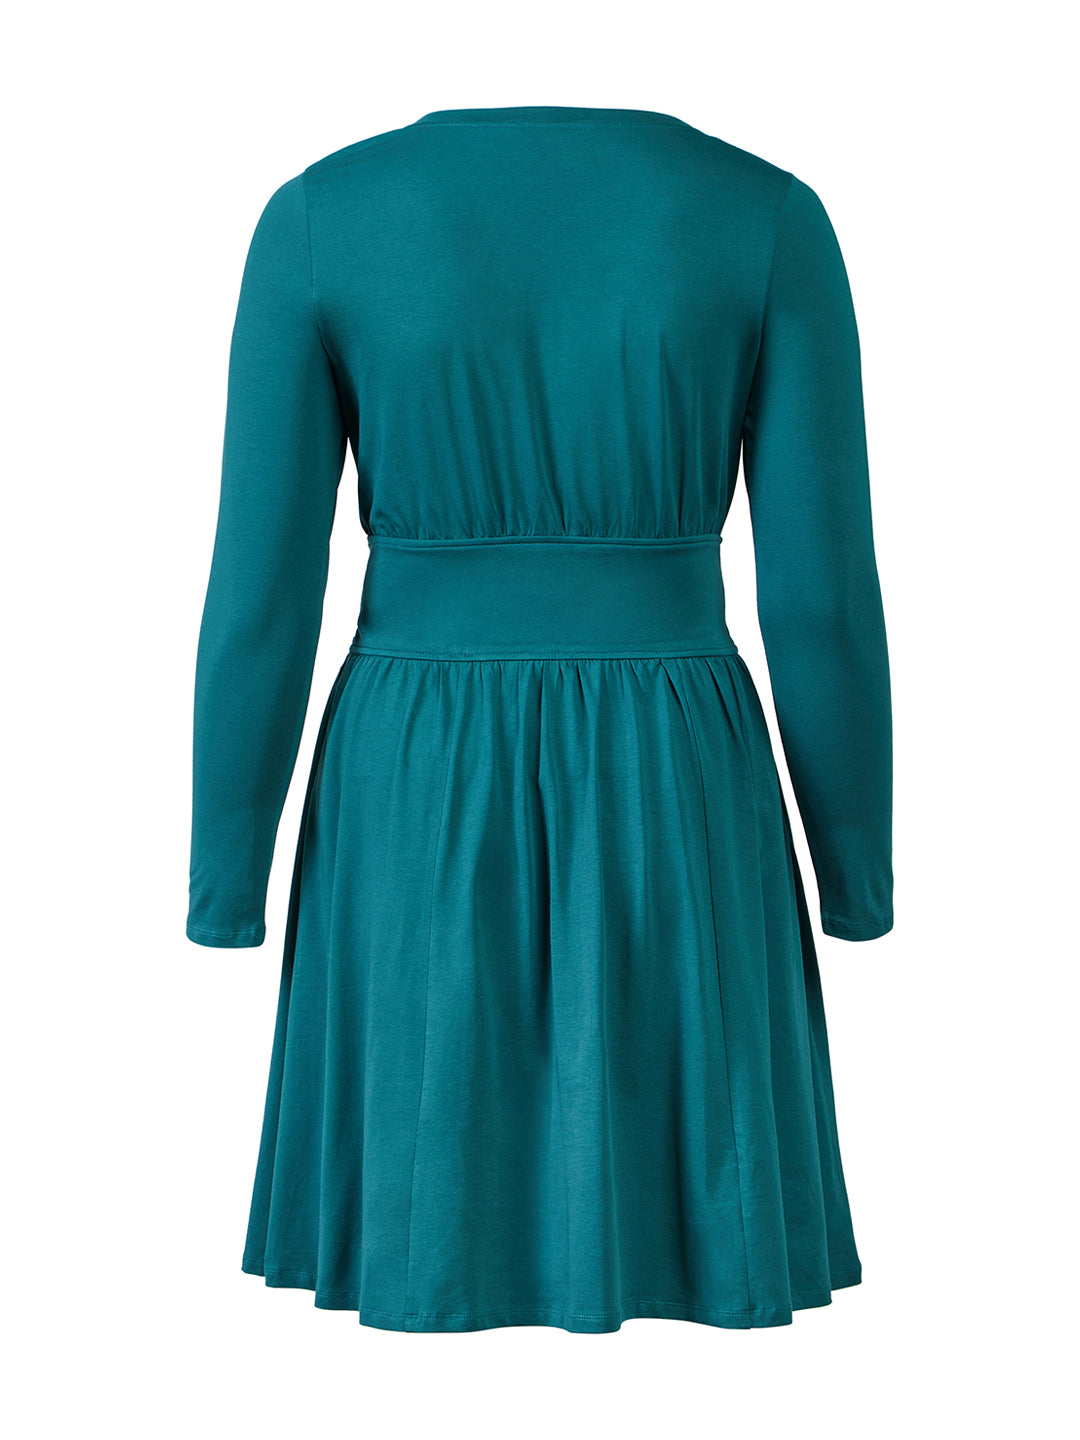 Banded Waist Teal Fit-And-Flare Dress, eShakti